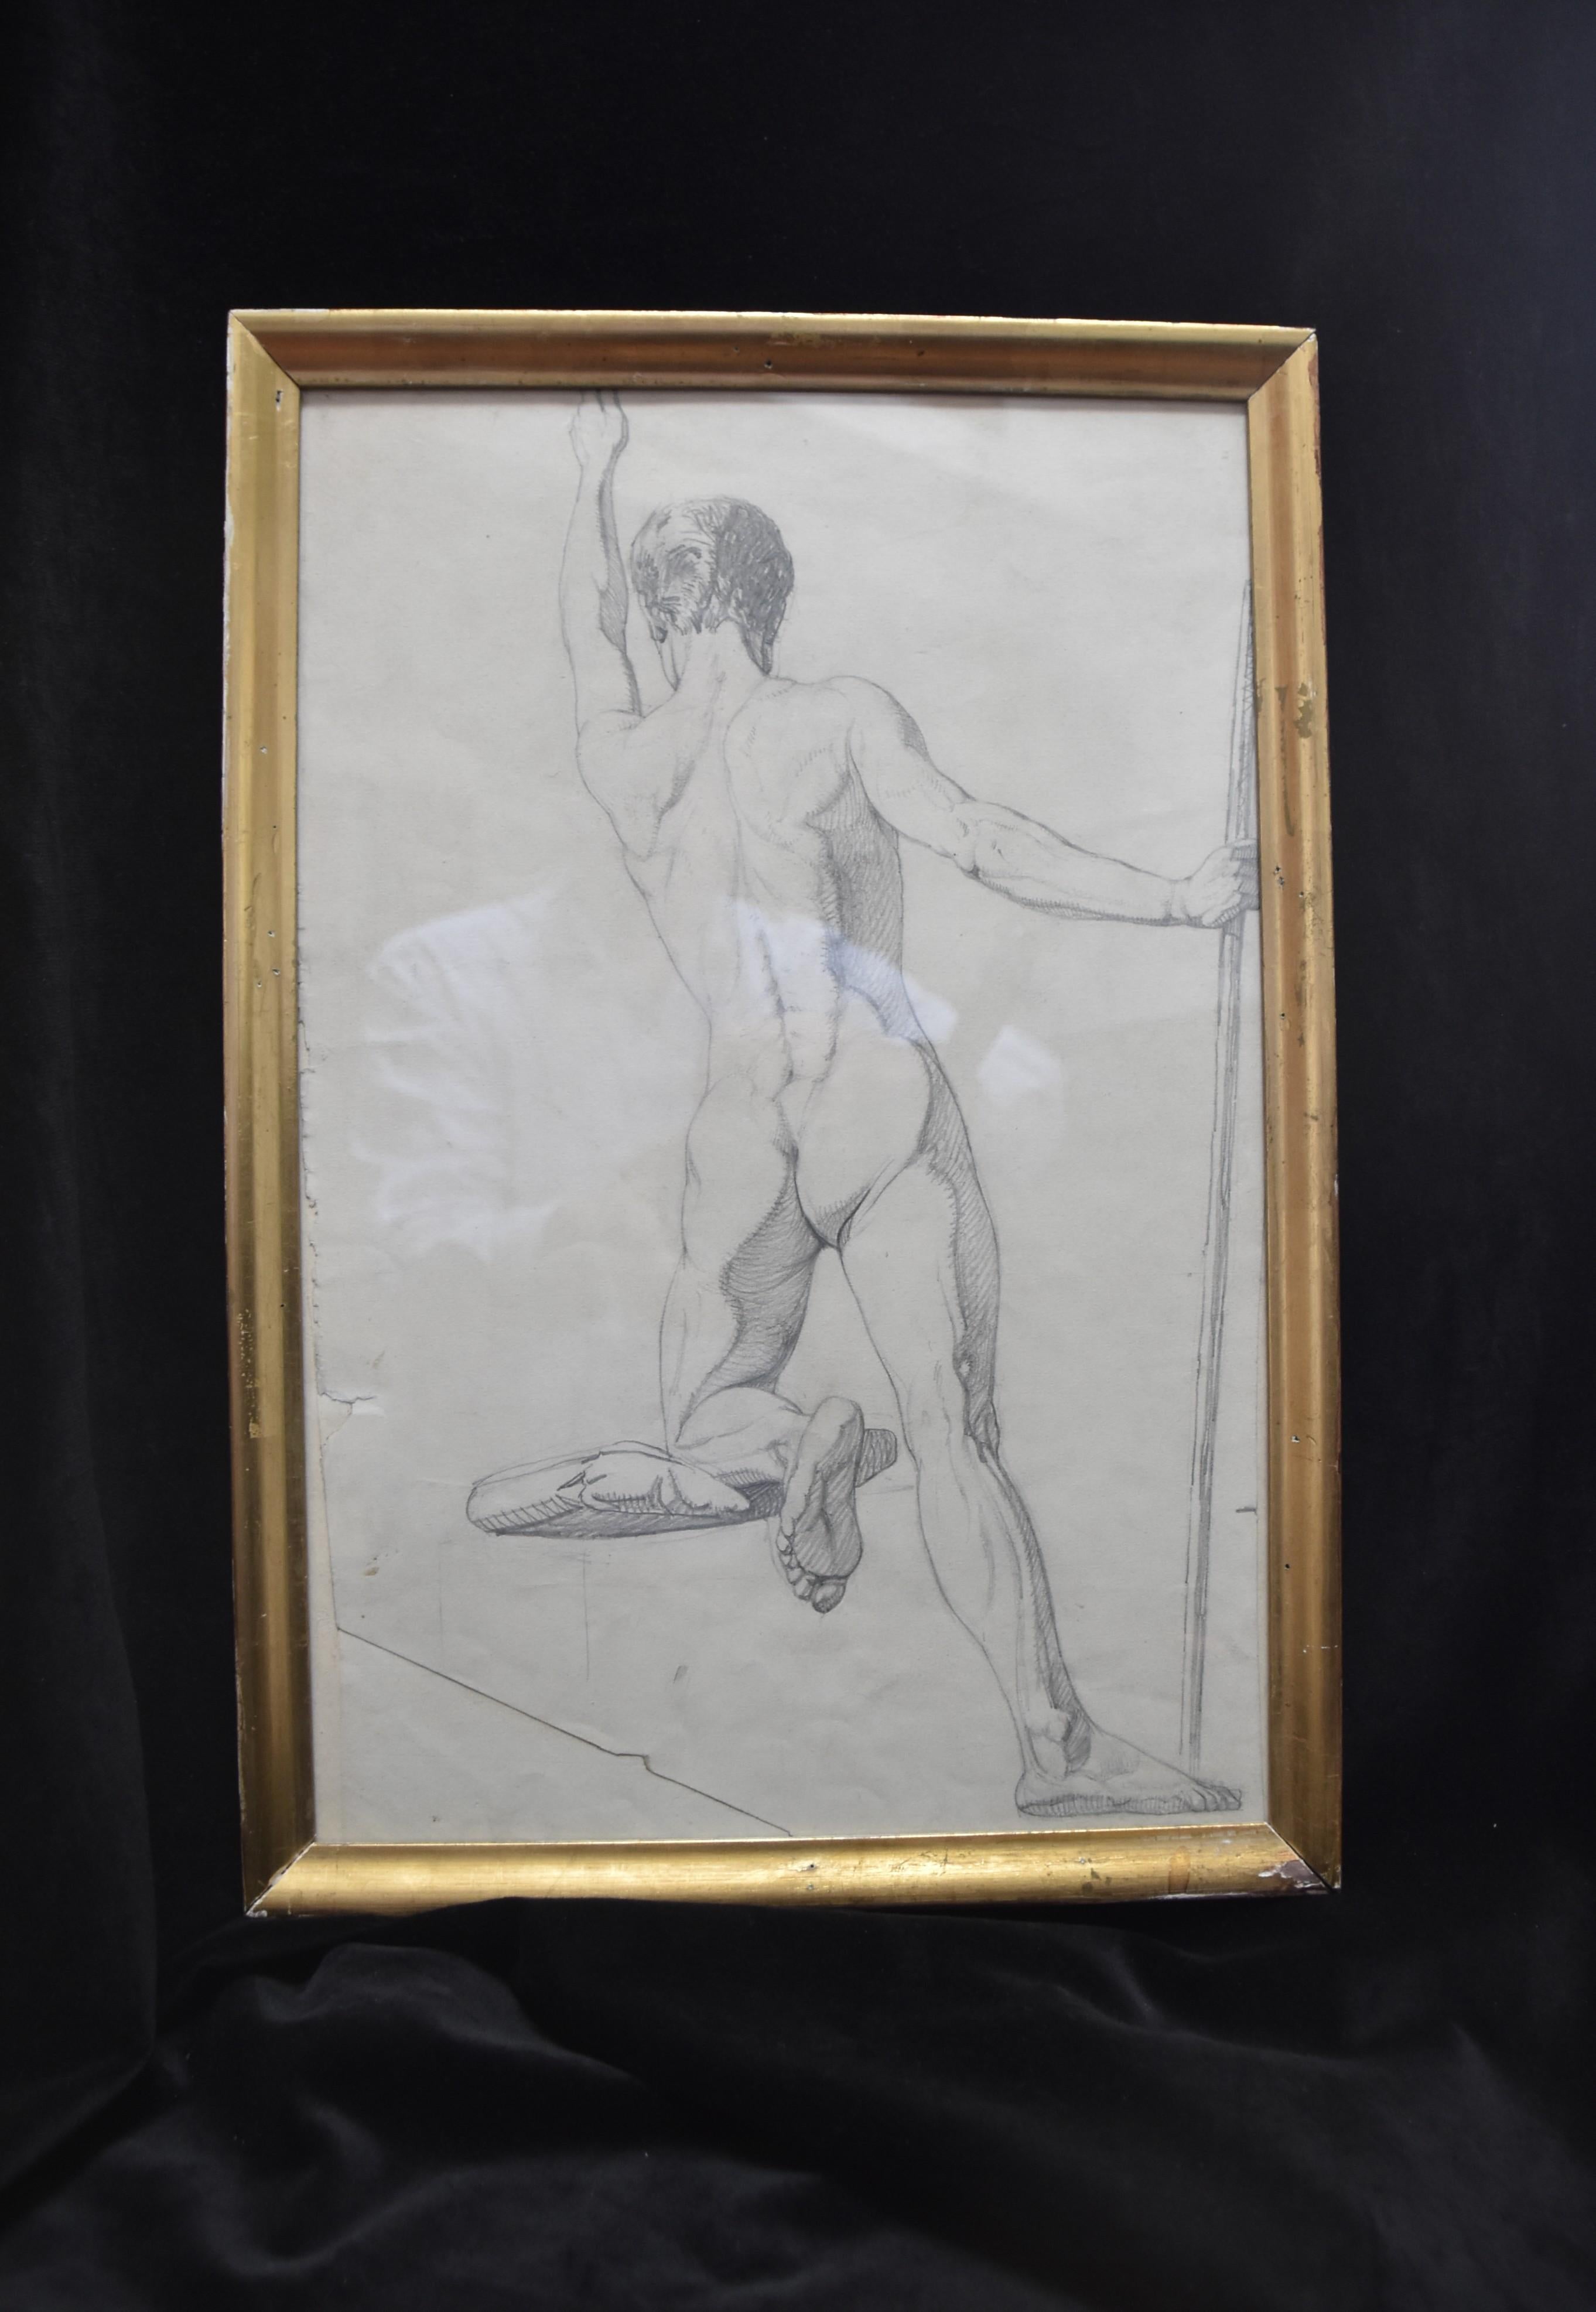 Danish Golden Age painter, first half of the 19th century
A male academy nude. Unsigned. 
Pencil on paper.
42 x 27 cm.
Condition : Uneven edges. One corner cropped.  (see photographs please)
In a very simple frame with some damages : 45.5 x 31 cm
on